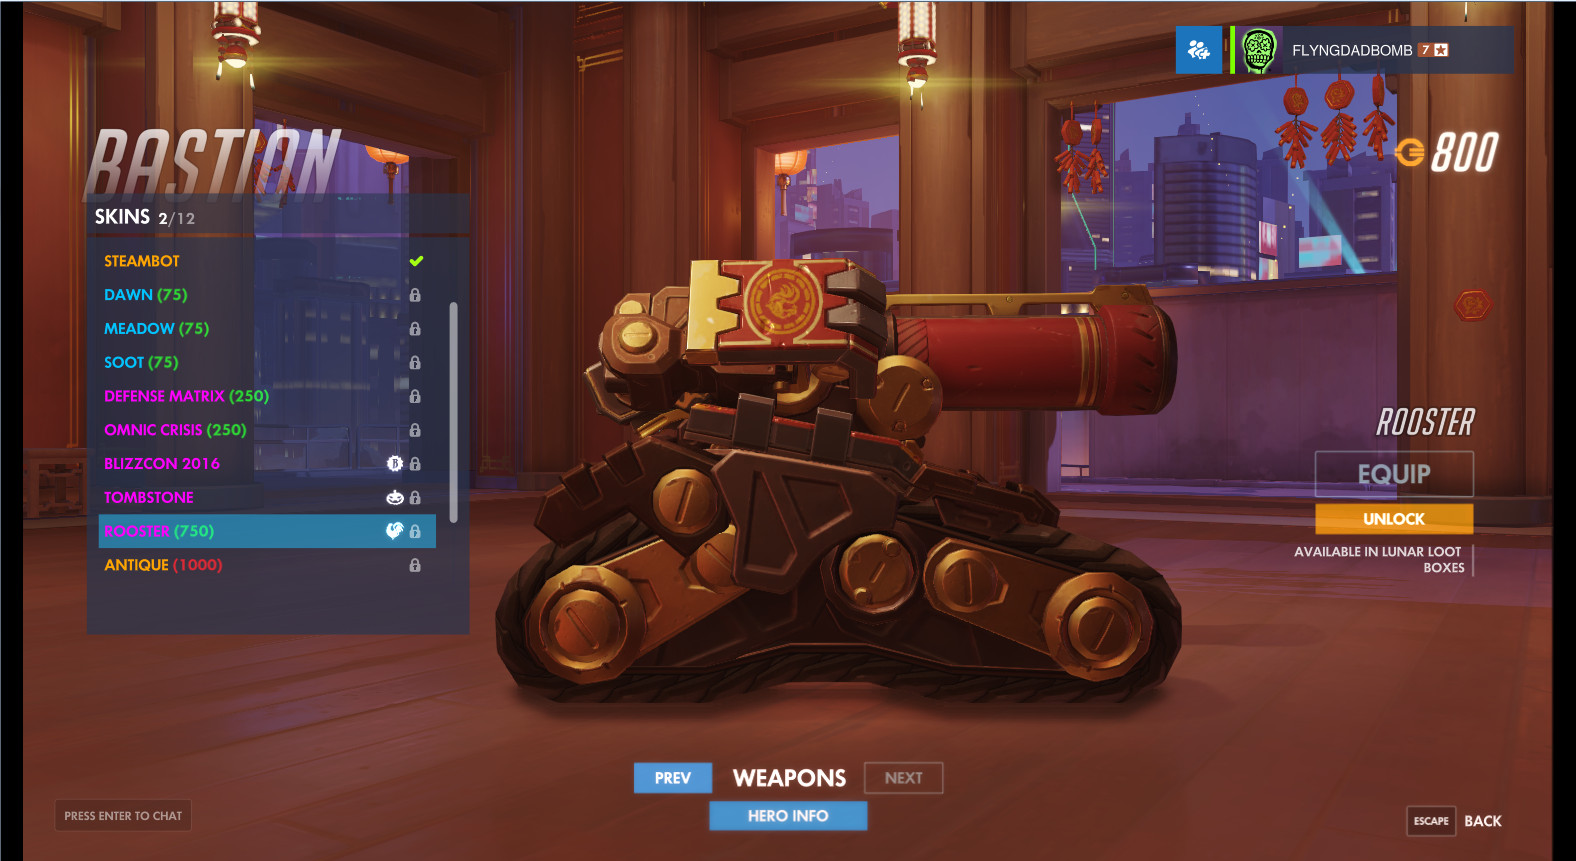 Rooster Tank (Bastion)